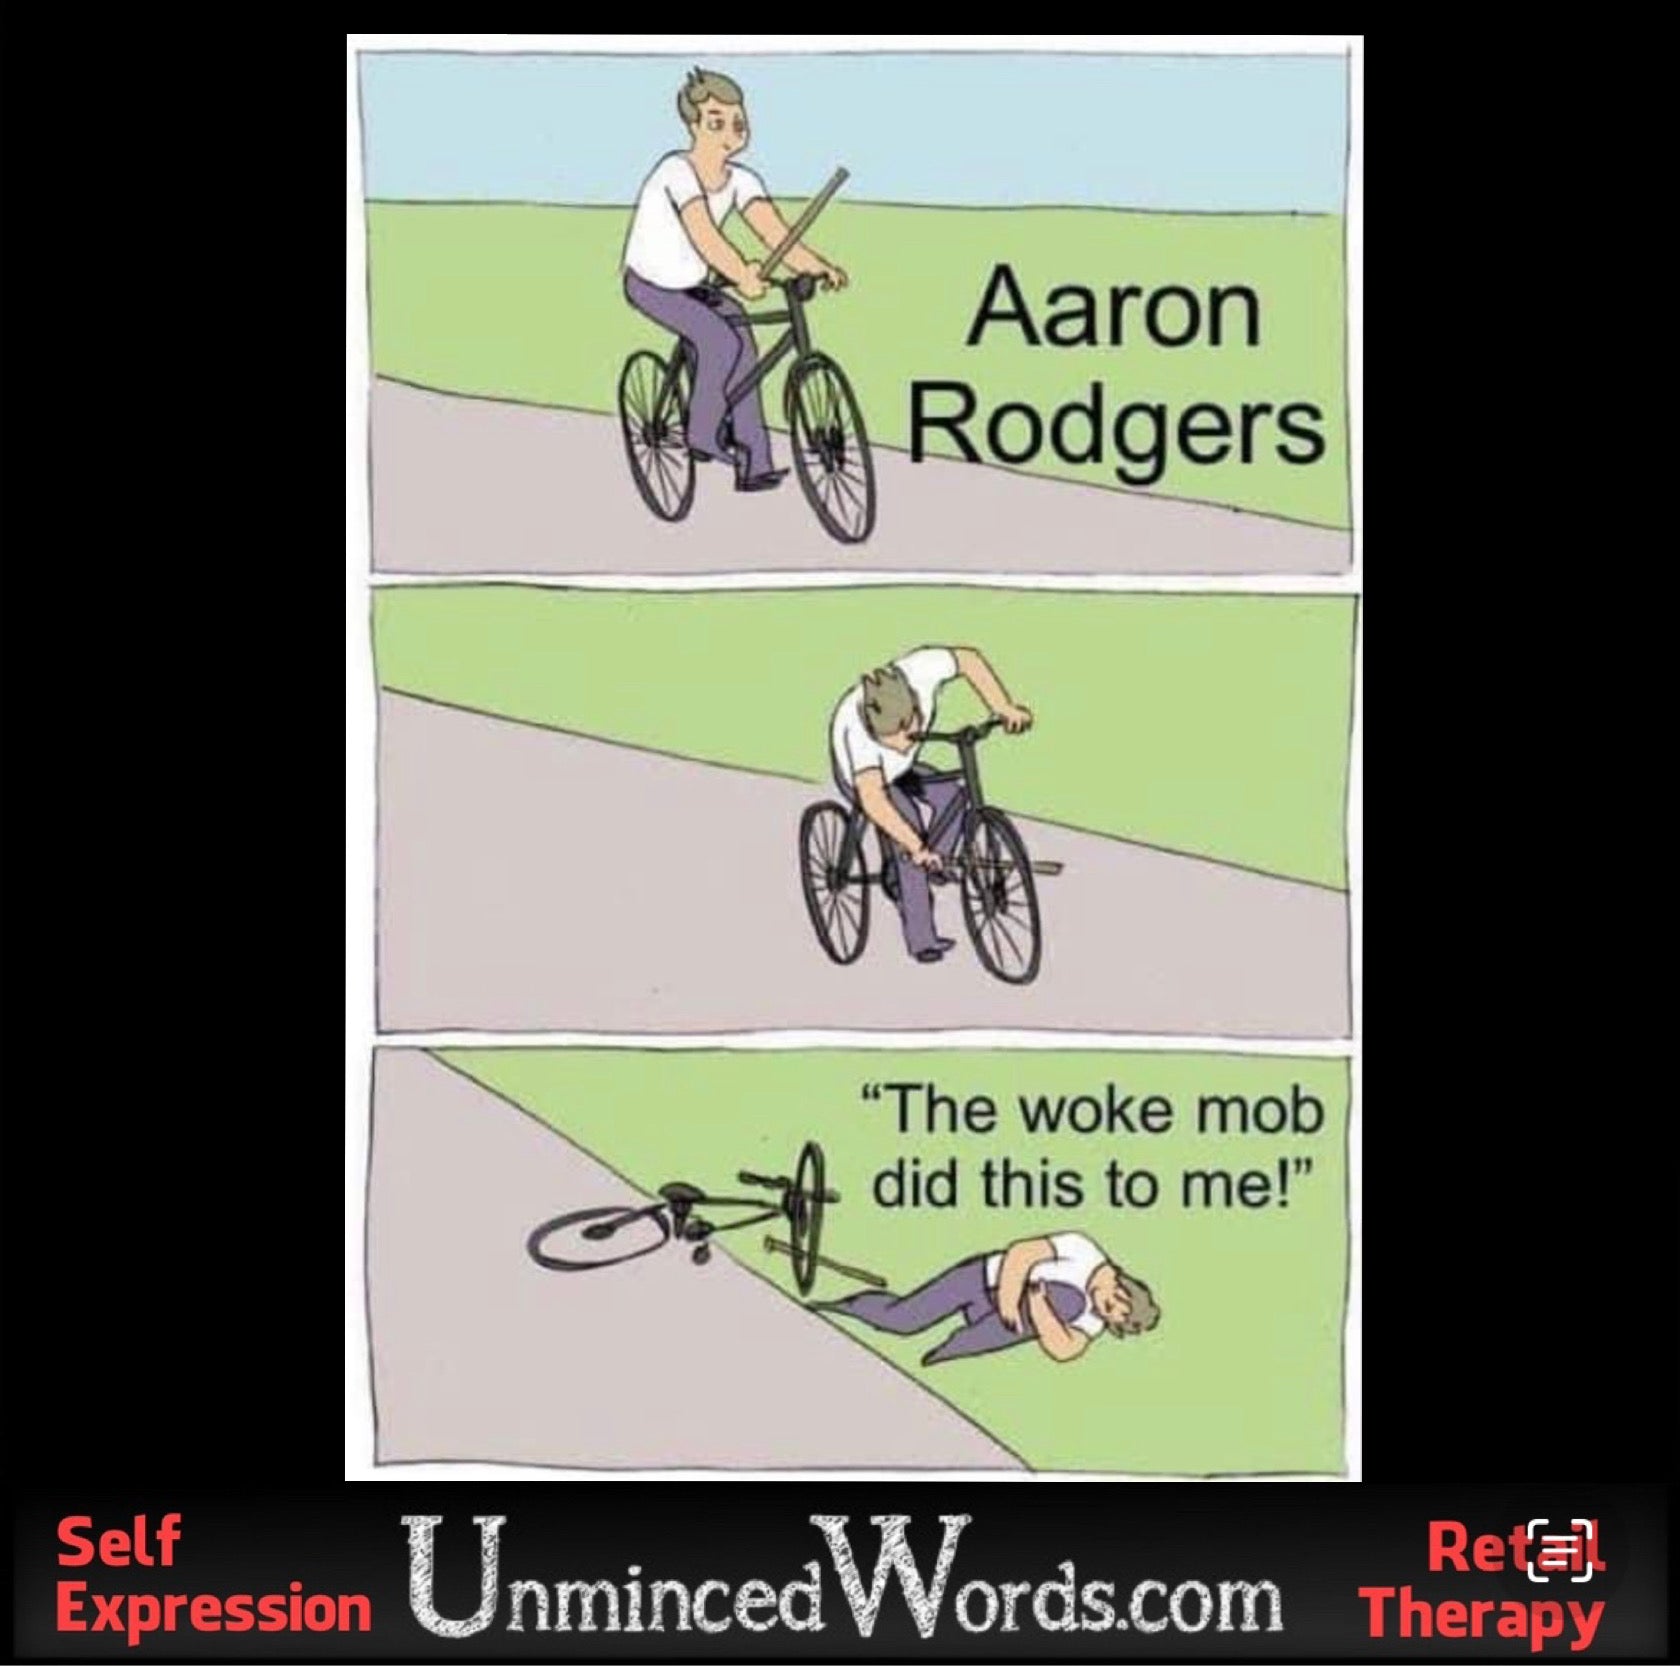 This Aaron Rodgers cartoon is dead on